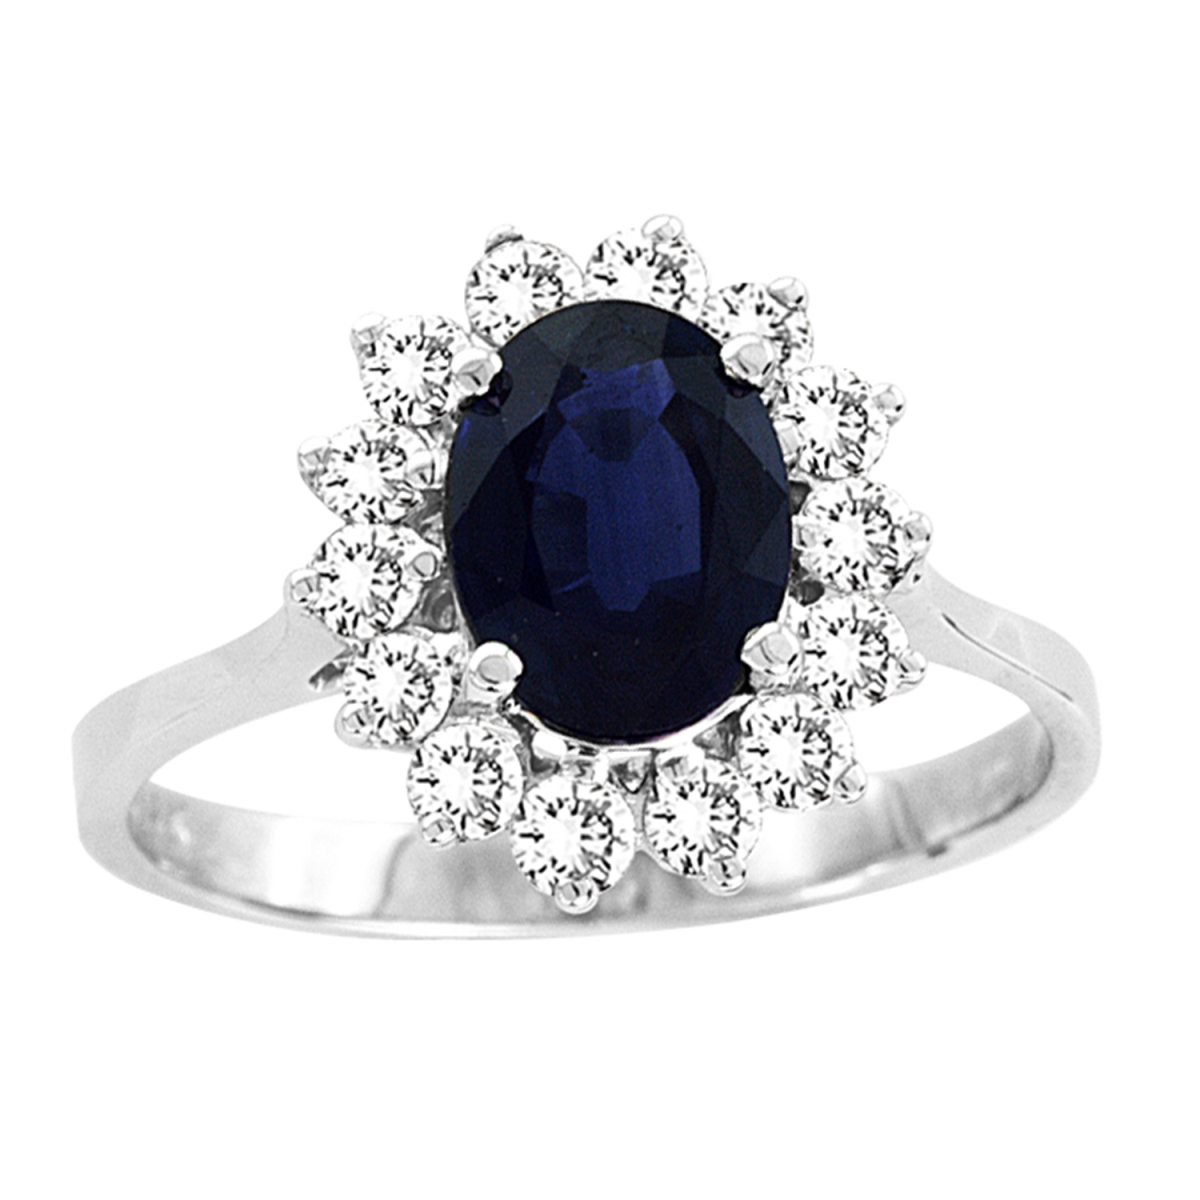 Picture of Louis Creations R1548SD-7.5 14K Gold Royal Collection 1.75 CTTW 8 x 6 mm 1.35 Carat Oval Sapphire Center Stone Natural Sapphire & Diamond Ring - Size 7.5